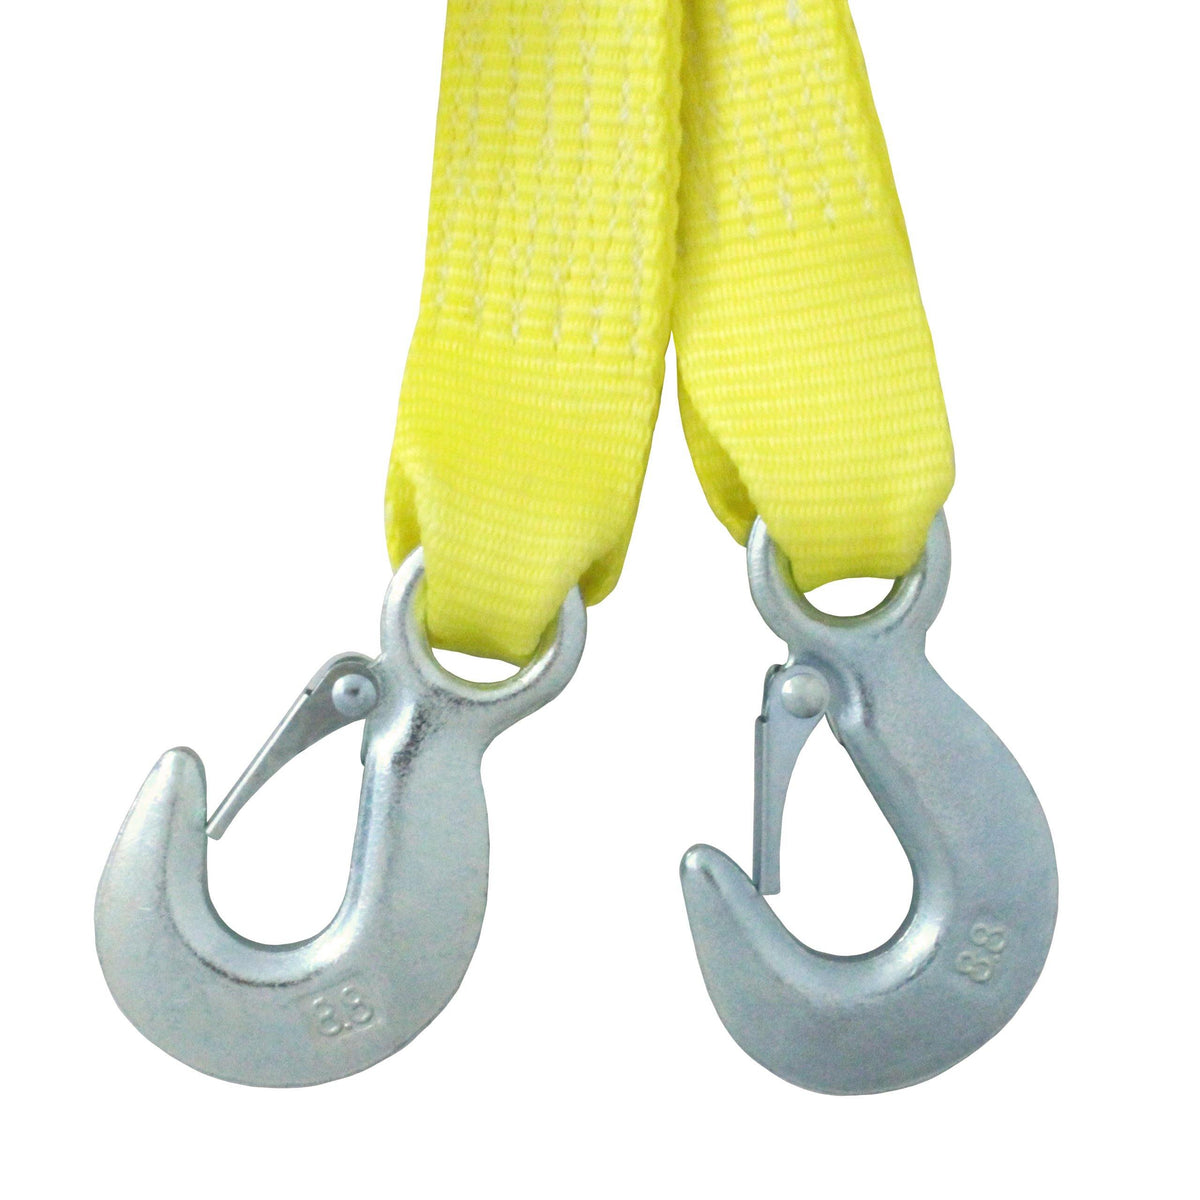 1-3/4 Inch Tow Strap with Safety Hooks | Boxer Tools